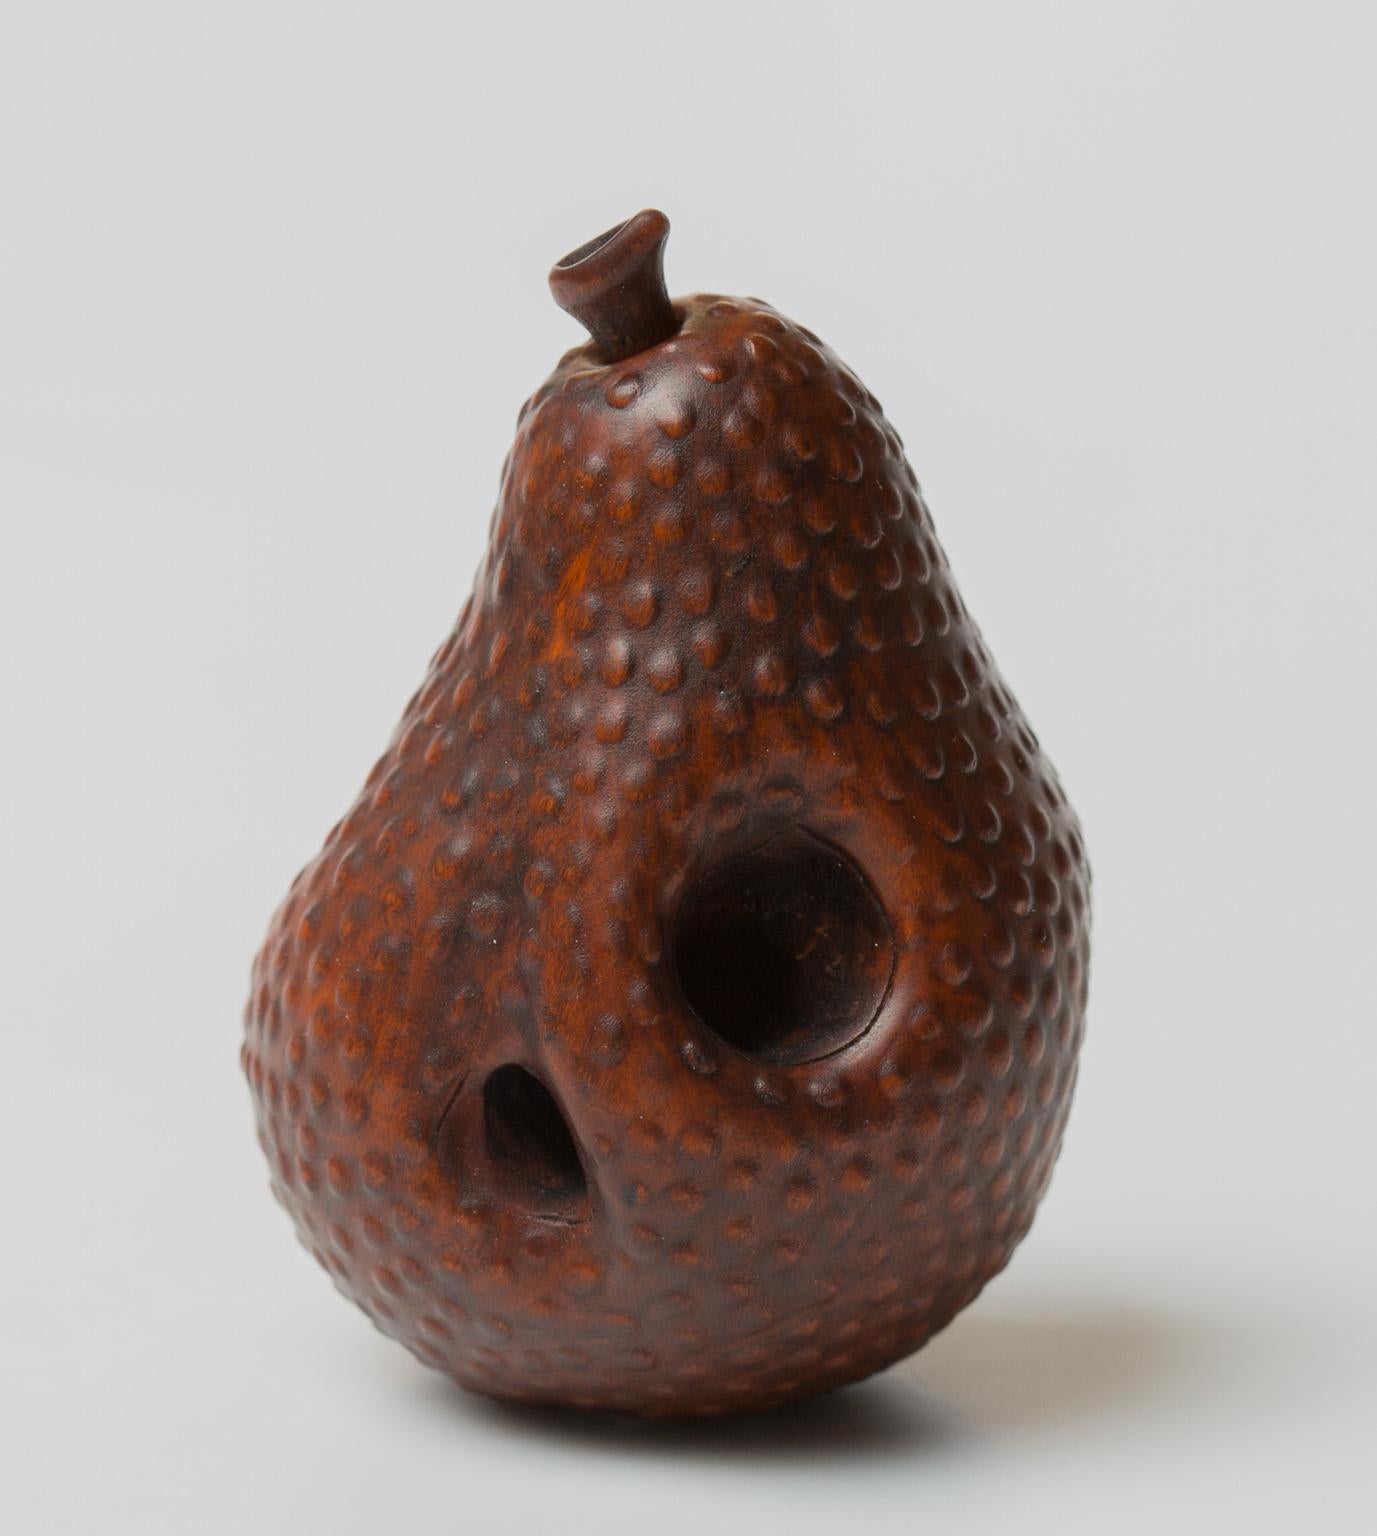 Japanese Wood Netsuke with a Wasp in a Pear, Nagoya School, 19th Century 2